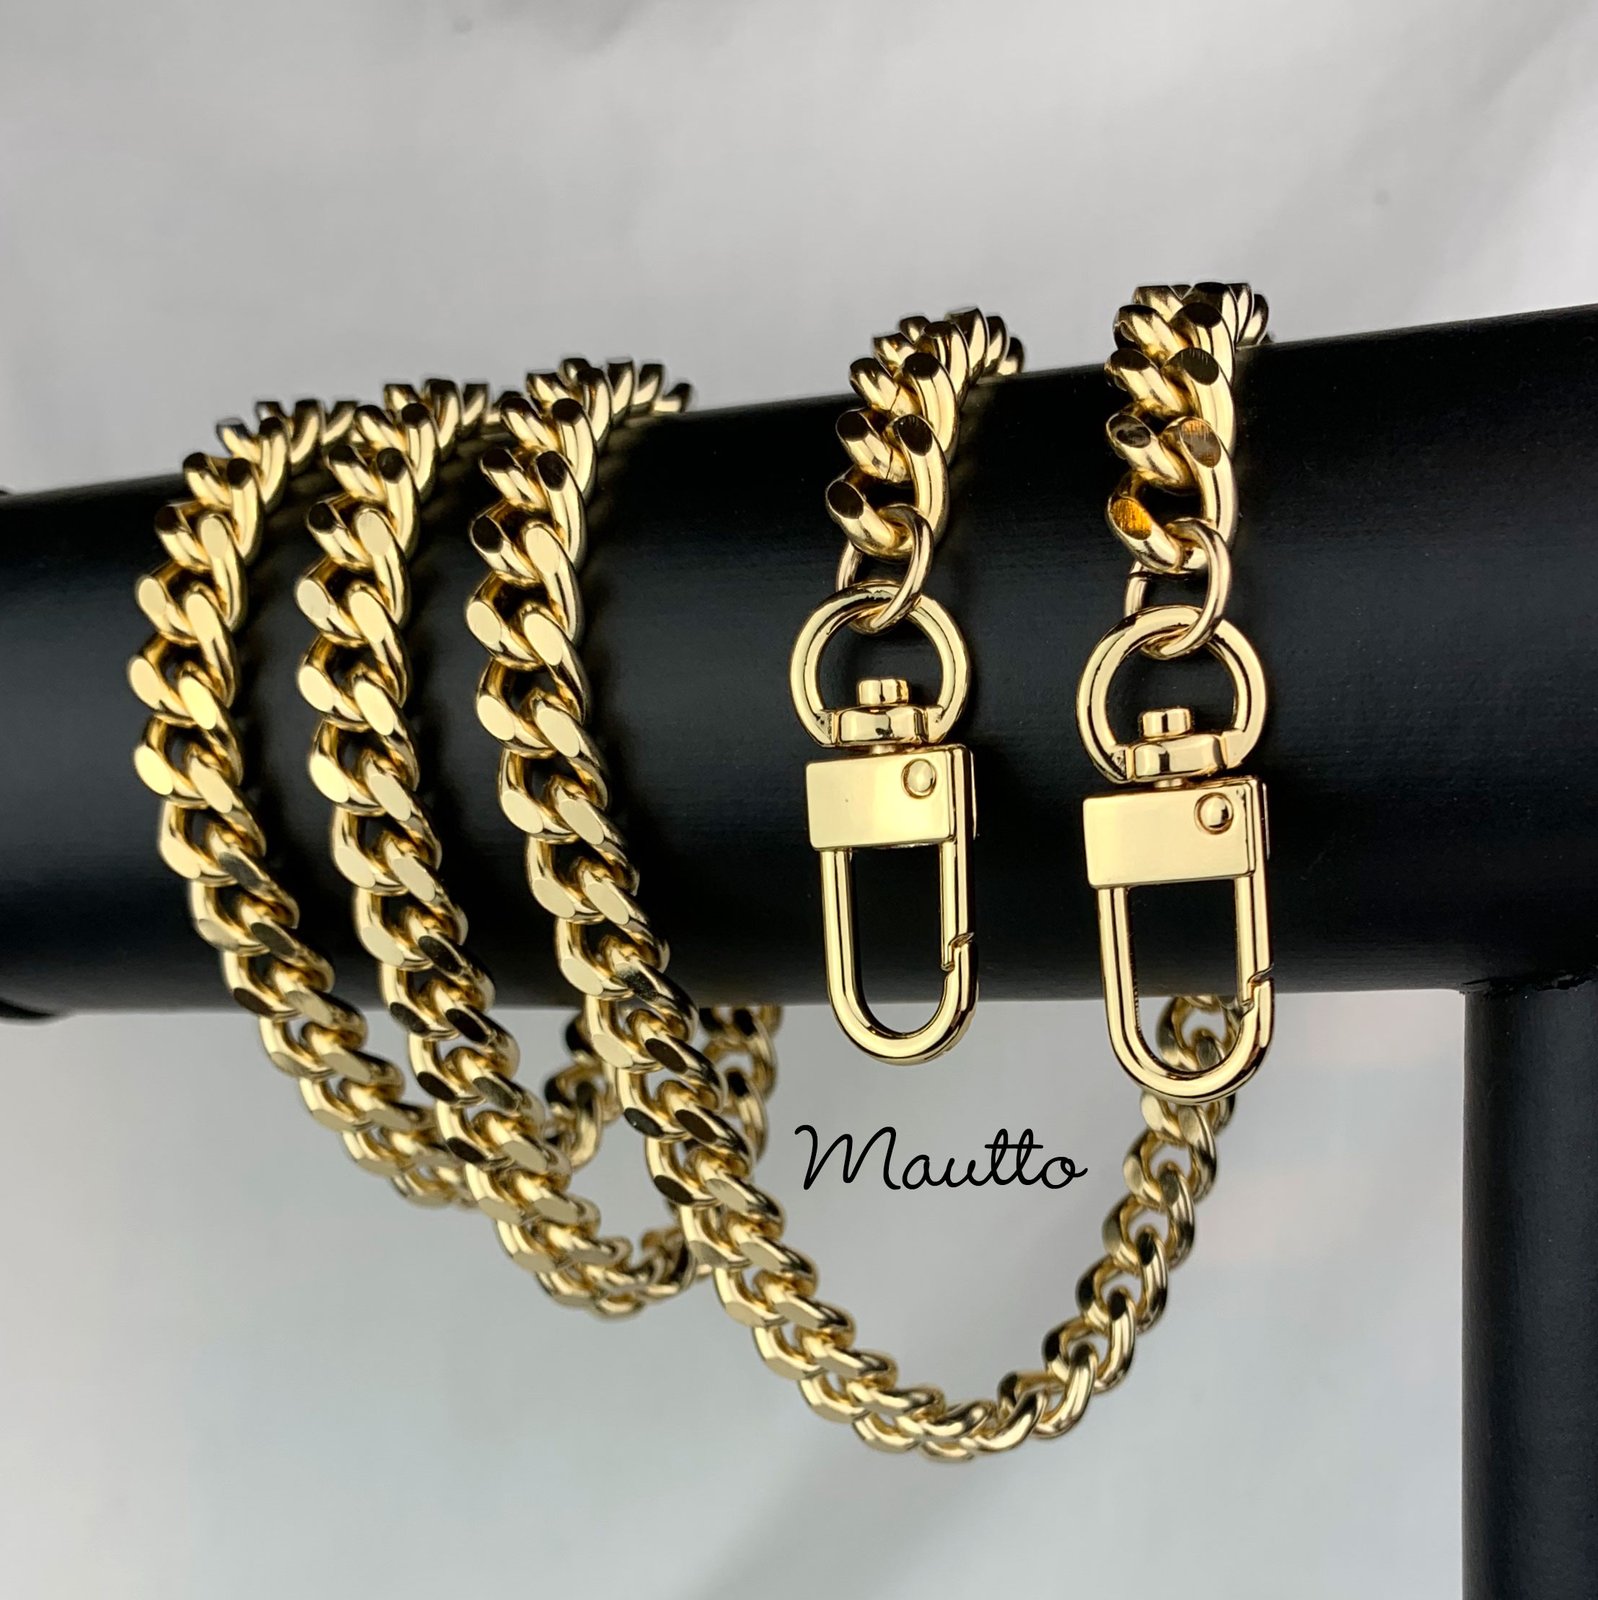 Gold & Silver Handbag Chain Collection, 8 Style Options